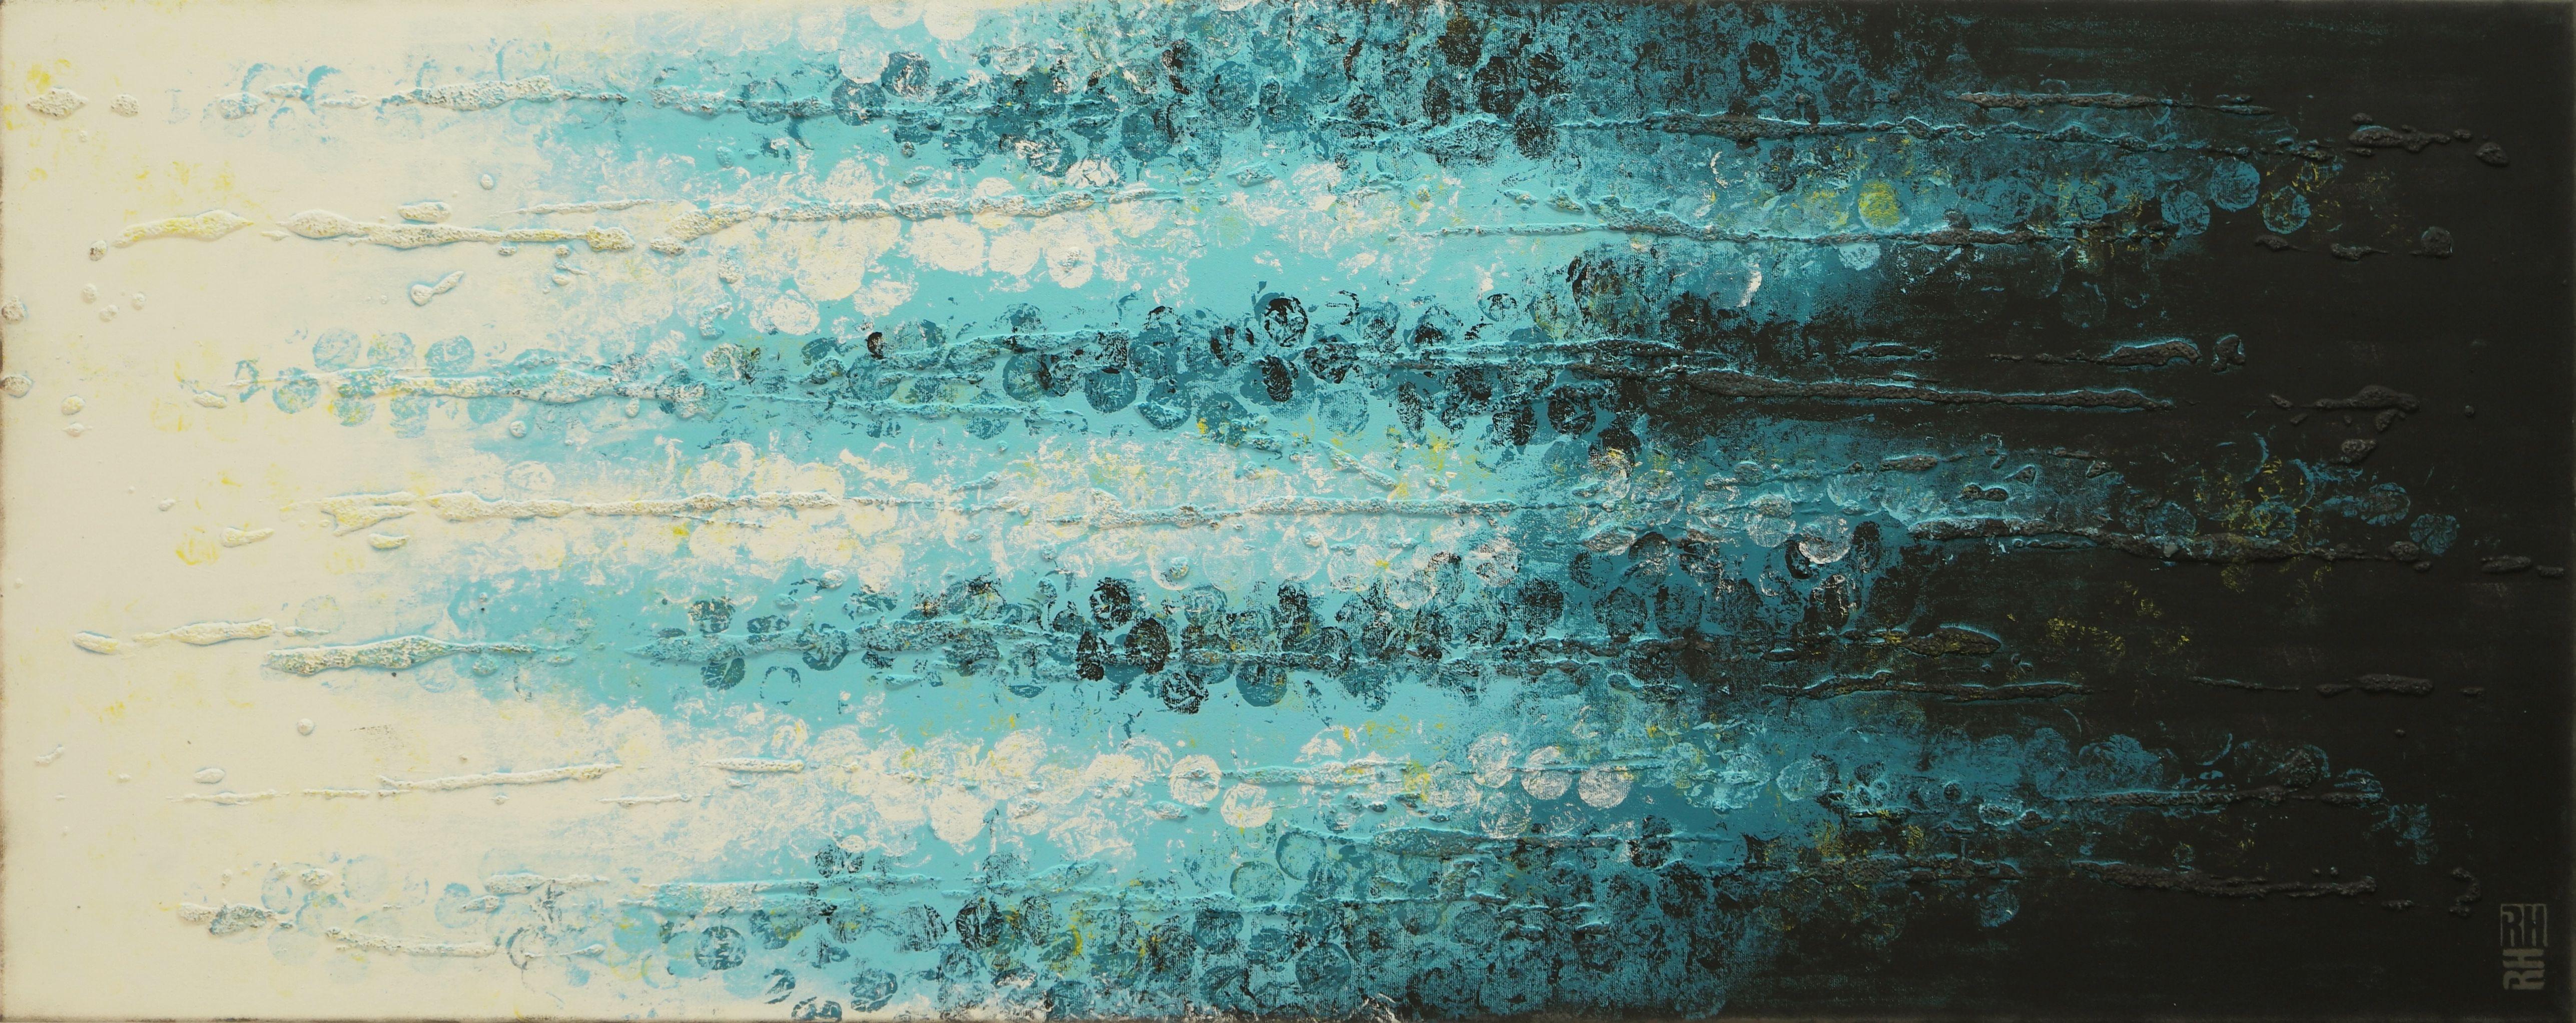 Ronald Hunter Abstract Painting - Stream Boiling Bubbles, Painting, Acrylic on Canvas